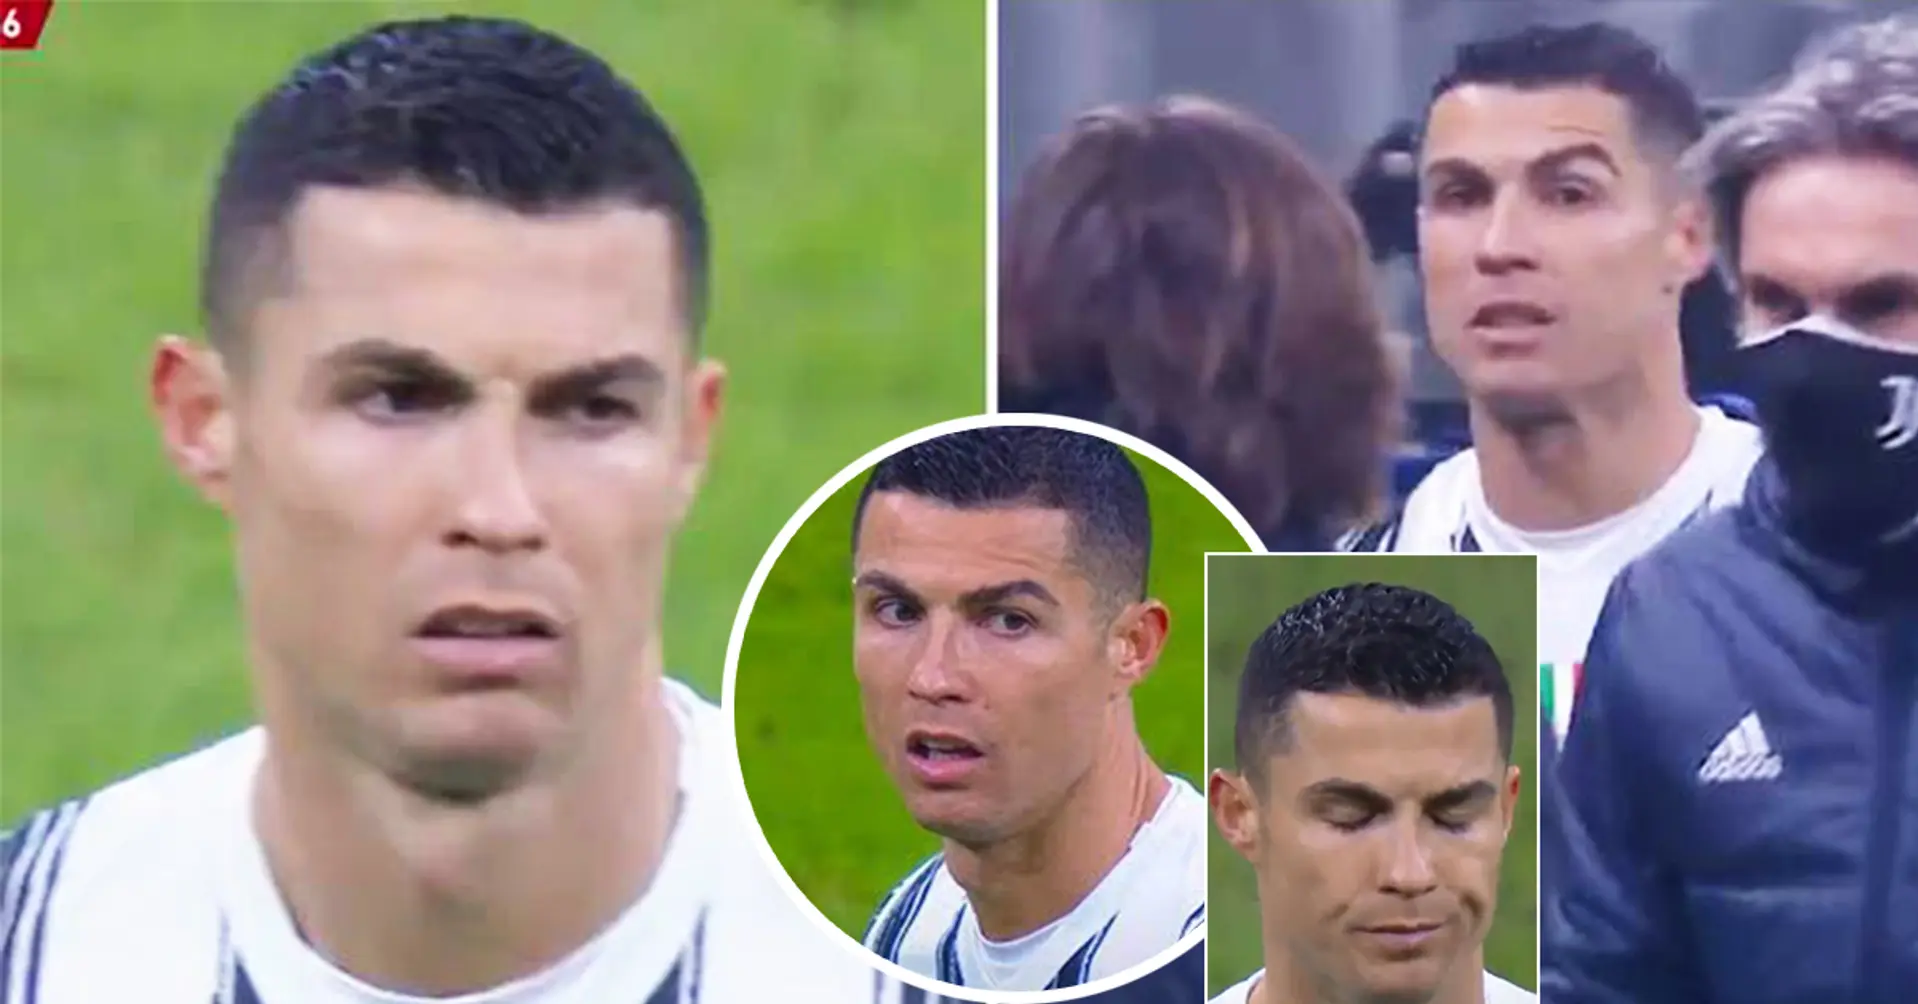 Cristiano shakes his head, looks visibly annoyed when subbed of by Pirlo vs. Inter